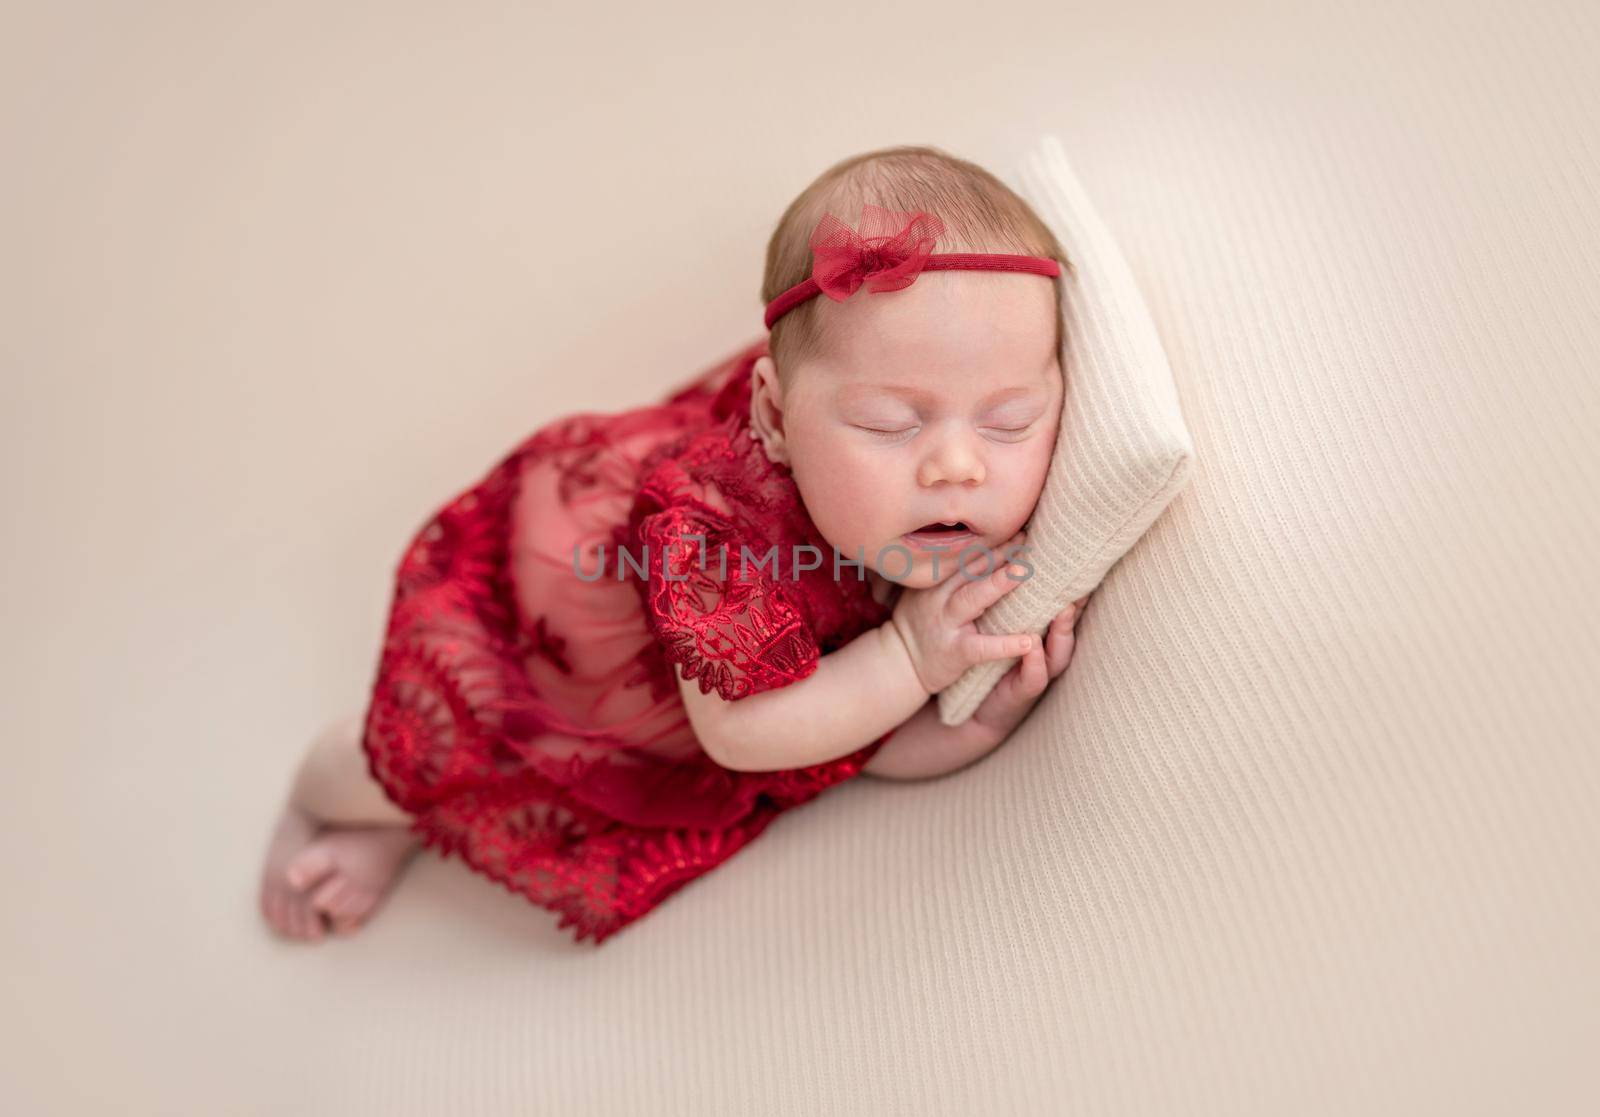 Cute newborn in red lace outfit resting on tiny pillow